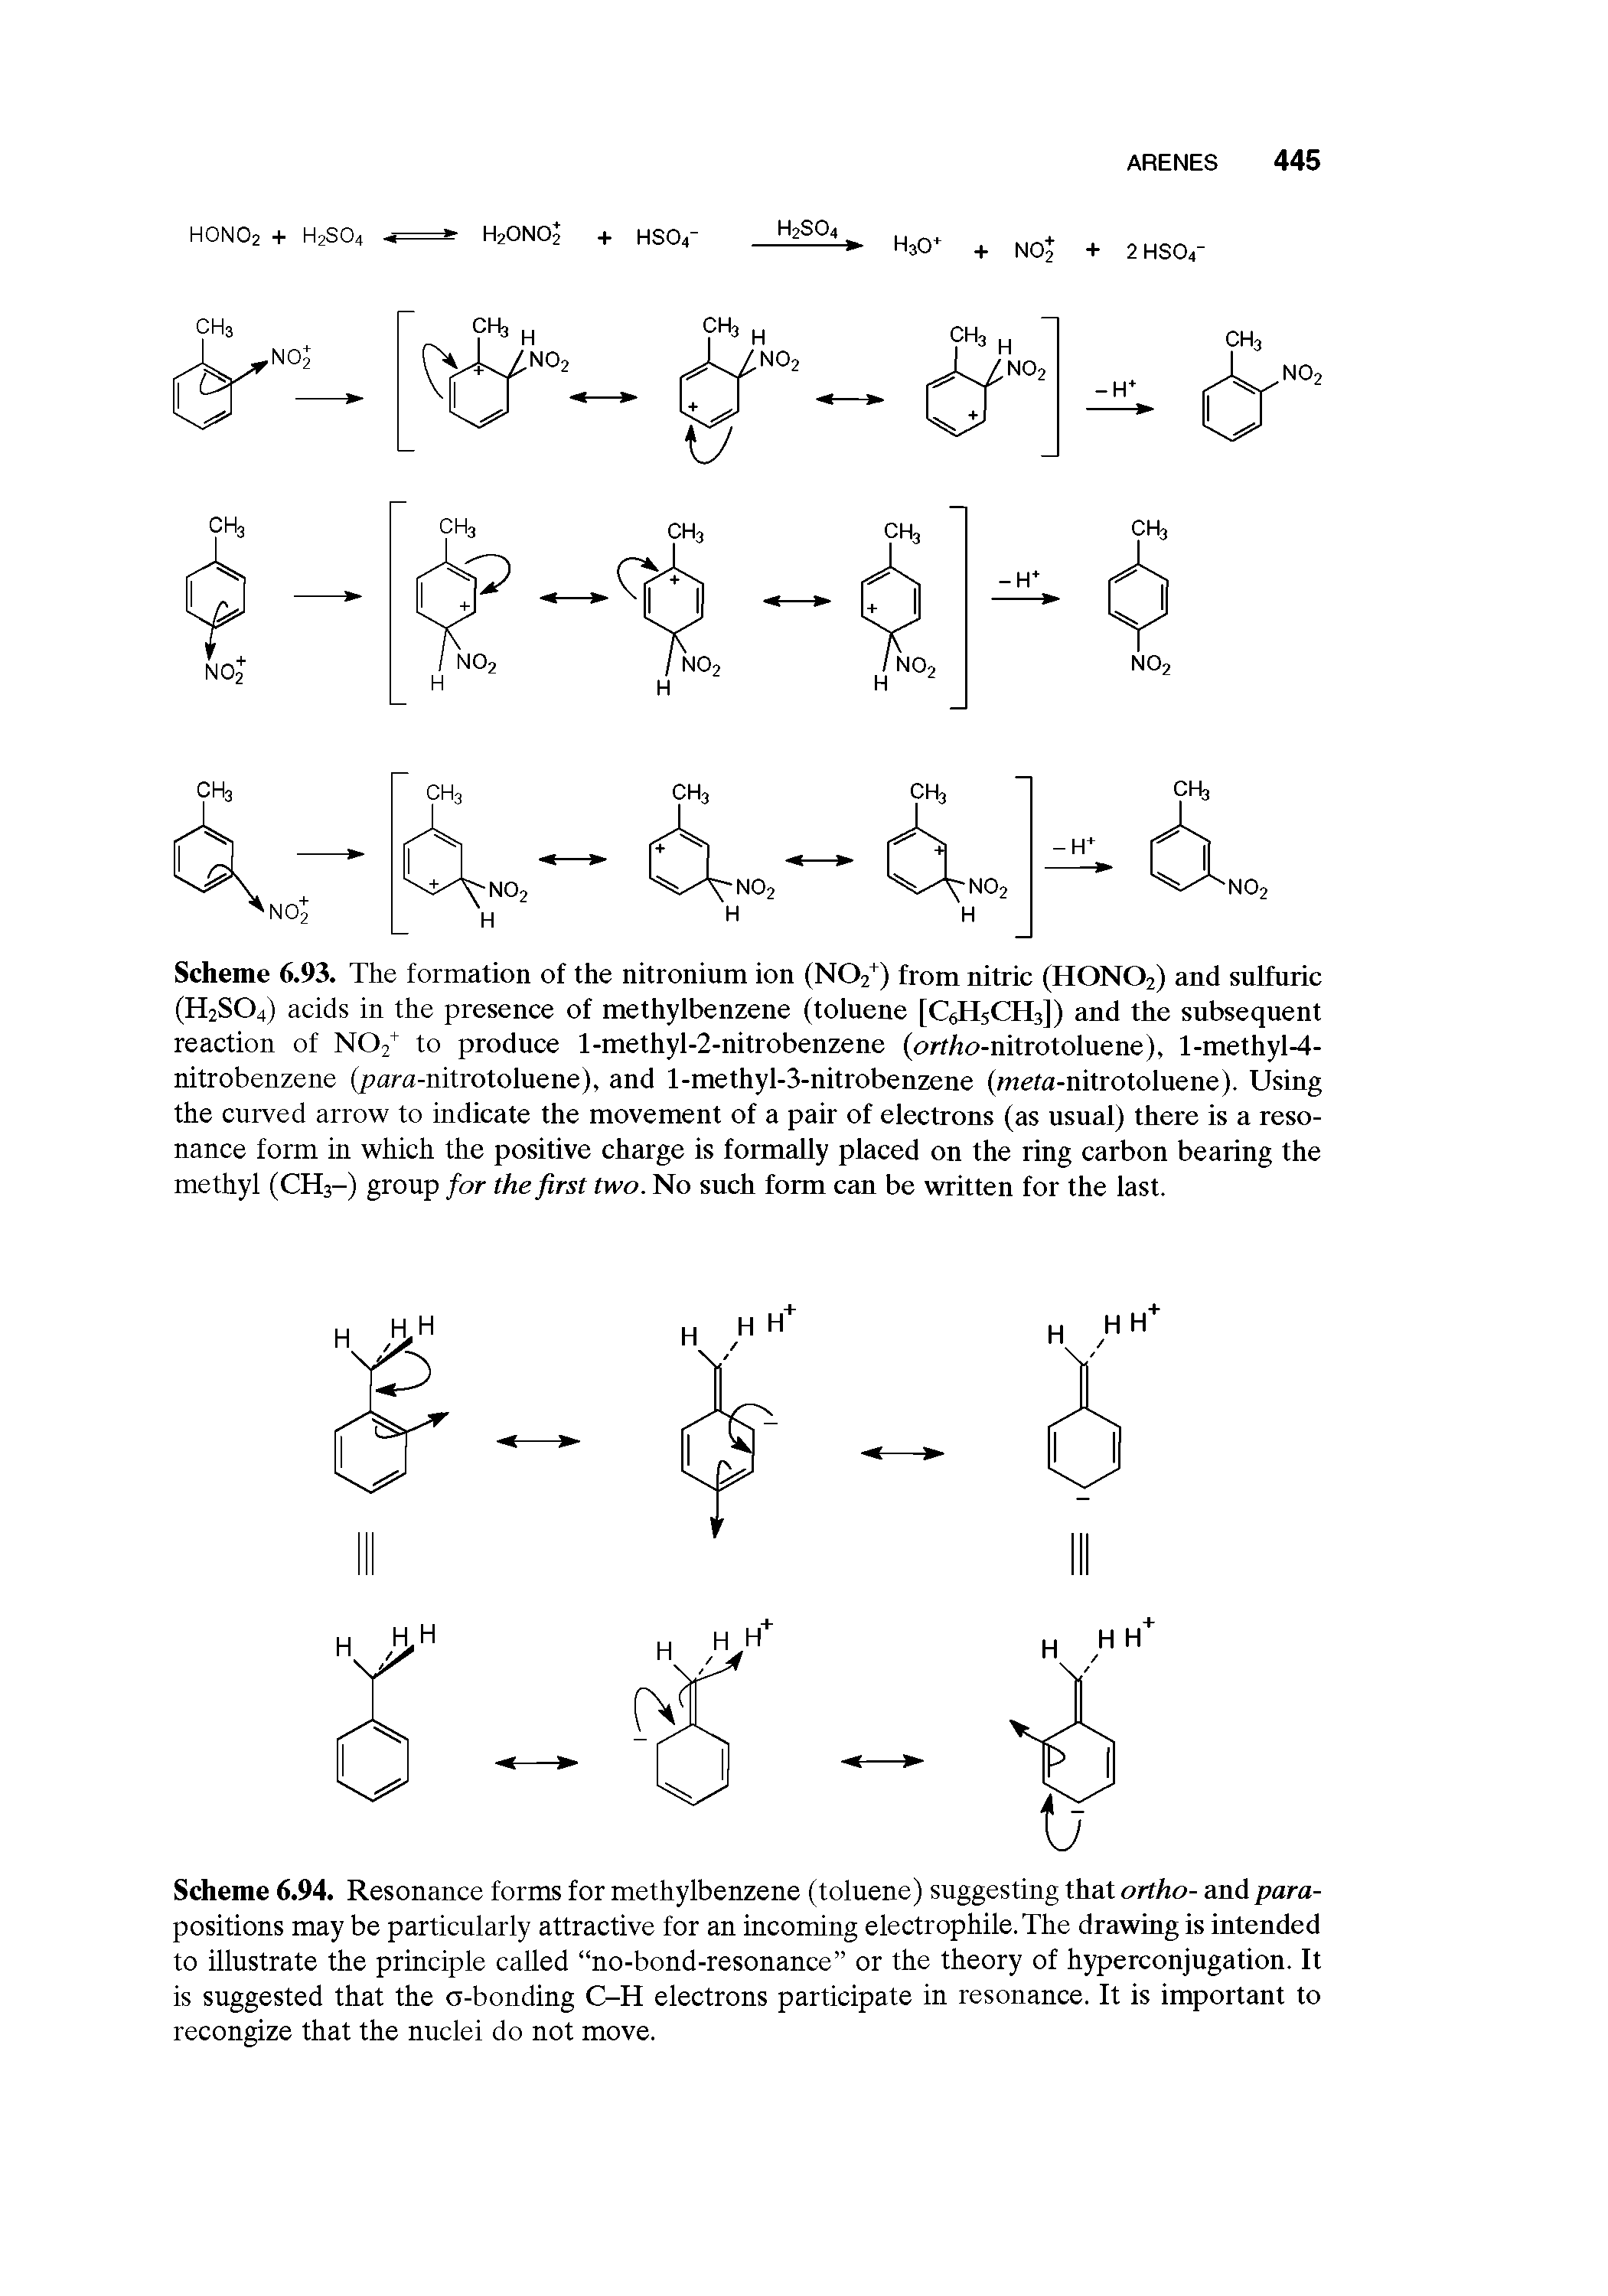 Scheme 6.93. The formation of the nitronium ion (NO2 ) from nitric (HONO2) and snlfuric (H2SO4) acids in the presence of methylbenzene (tolnene [C6HSCH3]) and the snbseqnent reaction of N02" to prodnce l-methyl-2-nitrobenzene (orf/jo-nitrotolnene), l-methyl-4-nitrobenzene (para-nitrotolnene), and l-methyl-3-nitrobenzene (mefa-nitrotolnene). Using the curved arrow to indicate the movement of a pair of electrons (as nsual) there is a resonance form in which the positive charge is formally placed on the ring carbon bearing the methyl (CH3-) group for the first two. No such form can be written for the last.